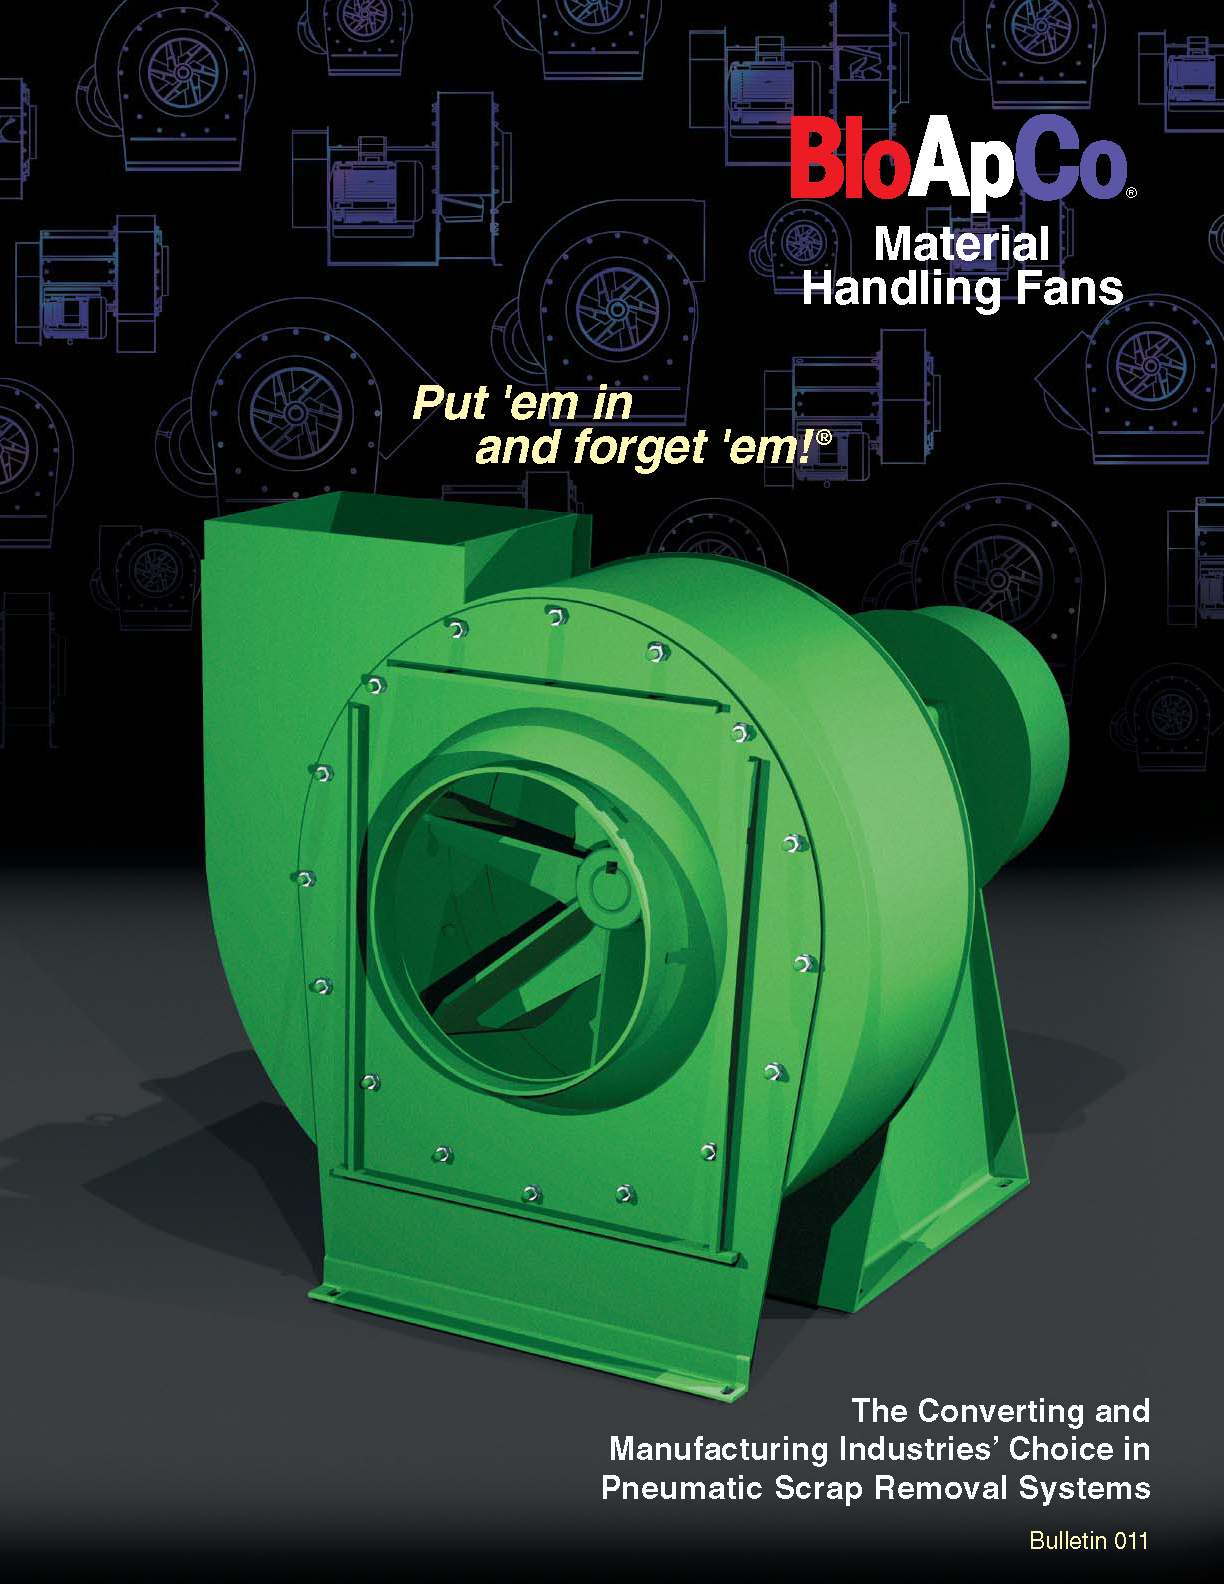 Learn more about BloApCo Material Handling Fans by viewing their Bulletin 011. 